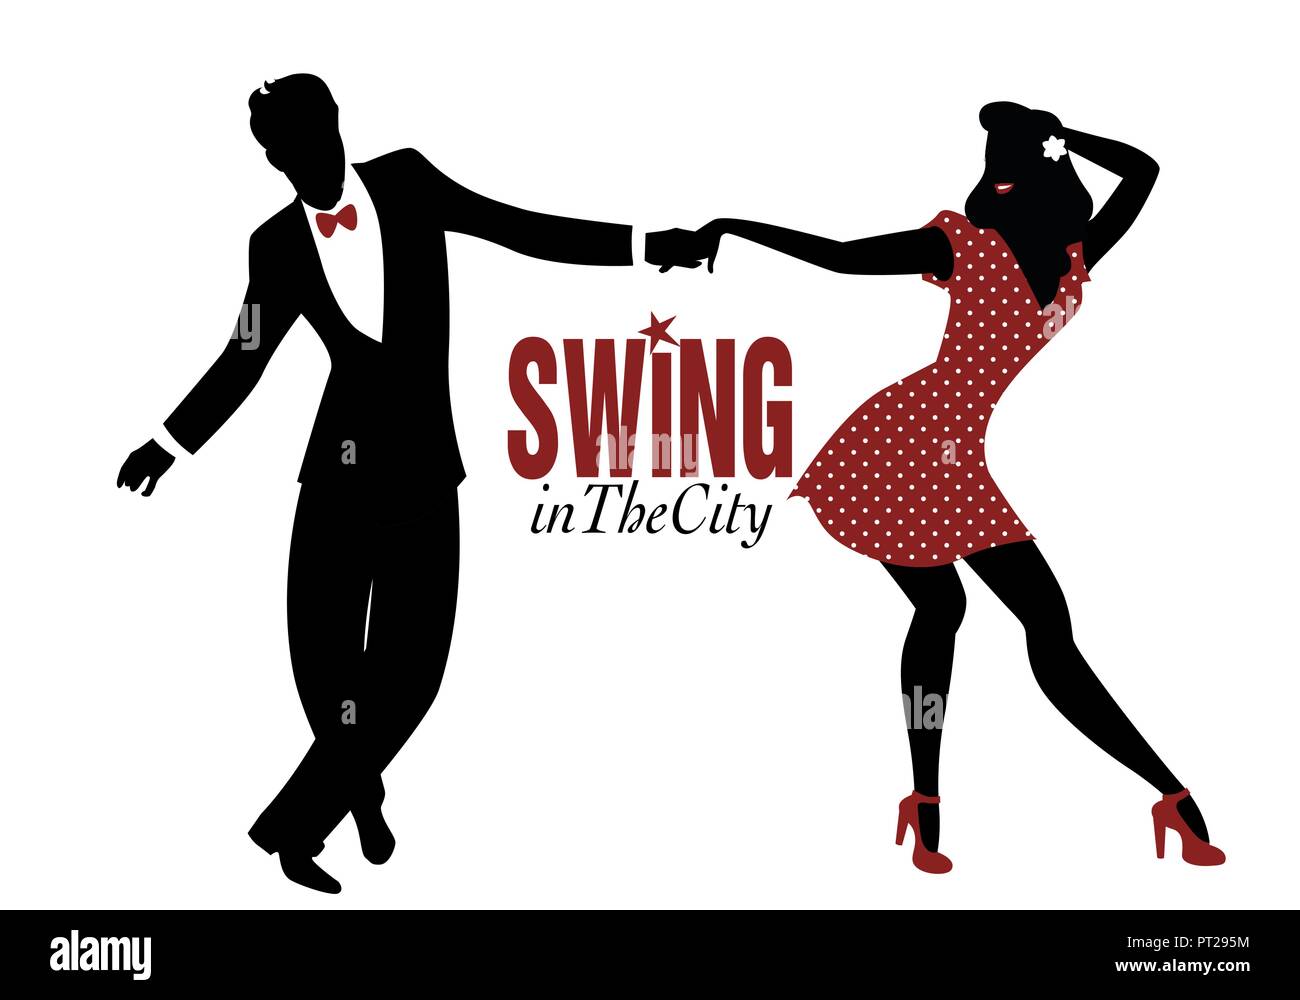 Junges Paar silhouette tanzen Swing, Lindy Hop oder Rock and Roll Stock Vektor